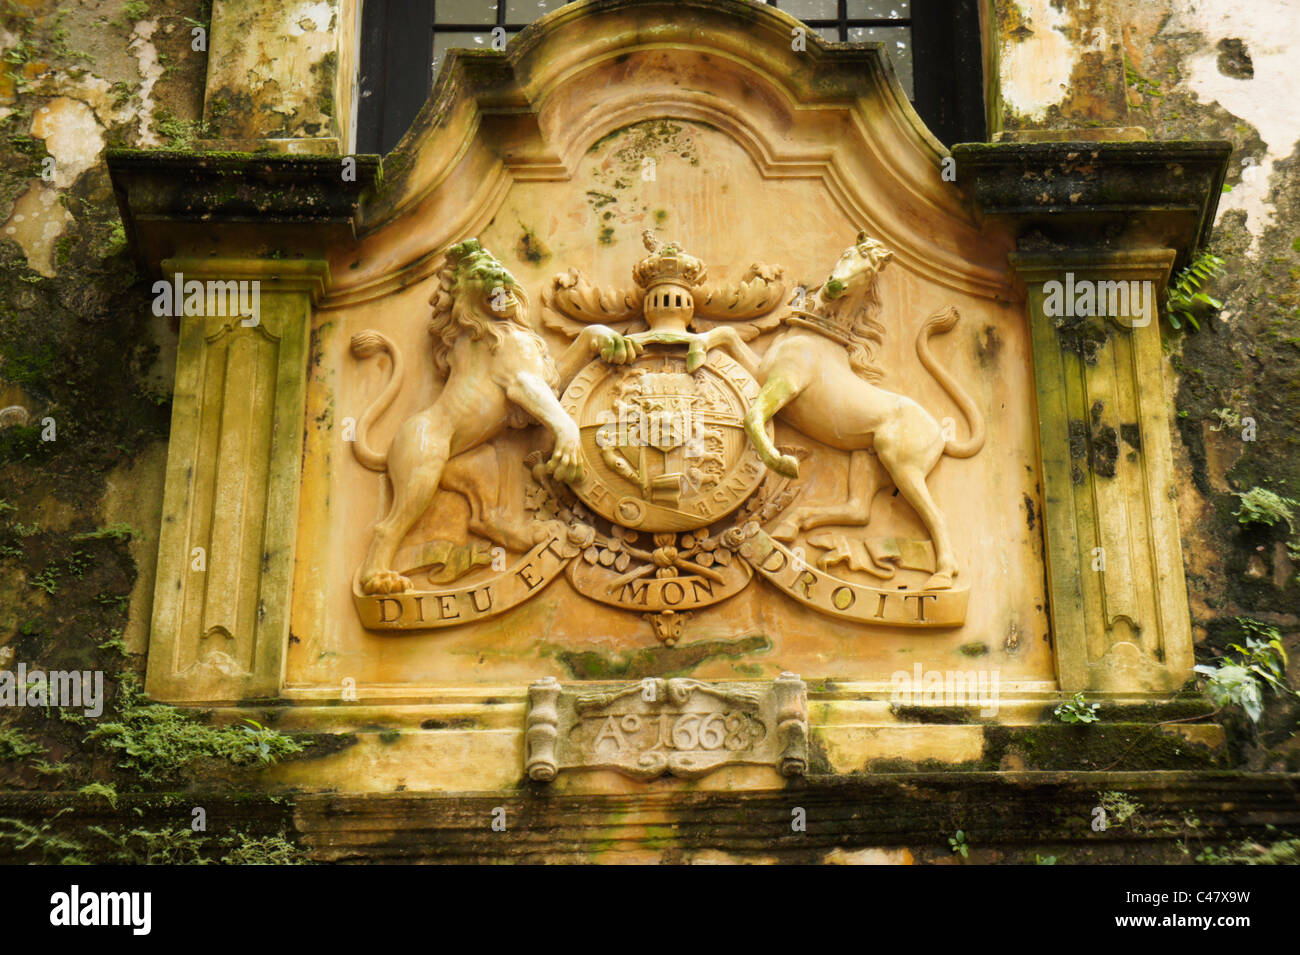 Royal coat of arms of the UK with the is the motto of the British Monarch Dieu et mon droit at the entrance gate to the historic Stock Photo